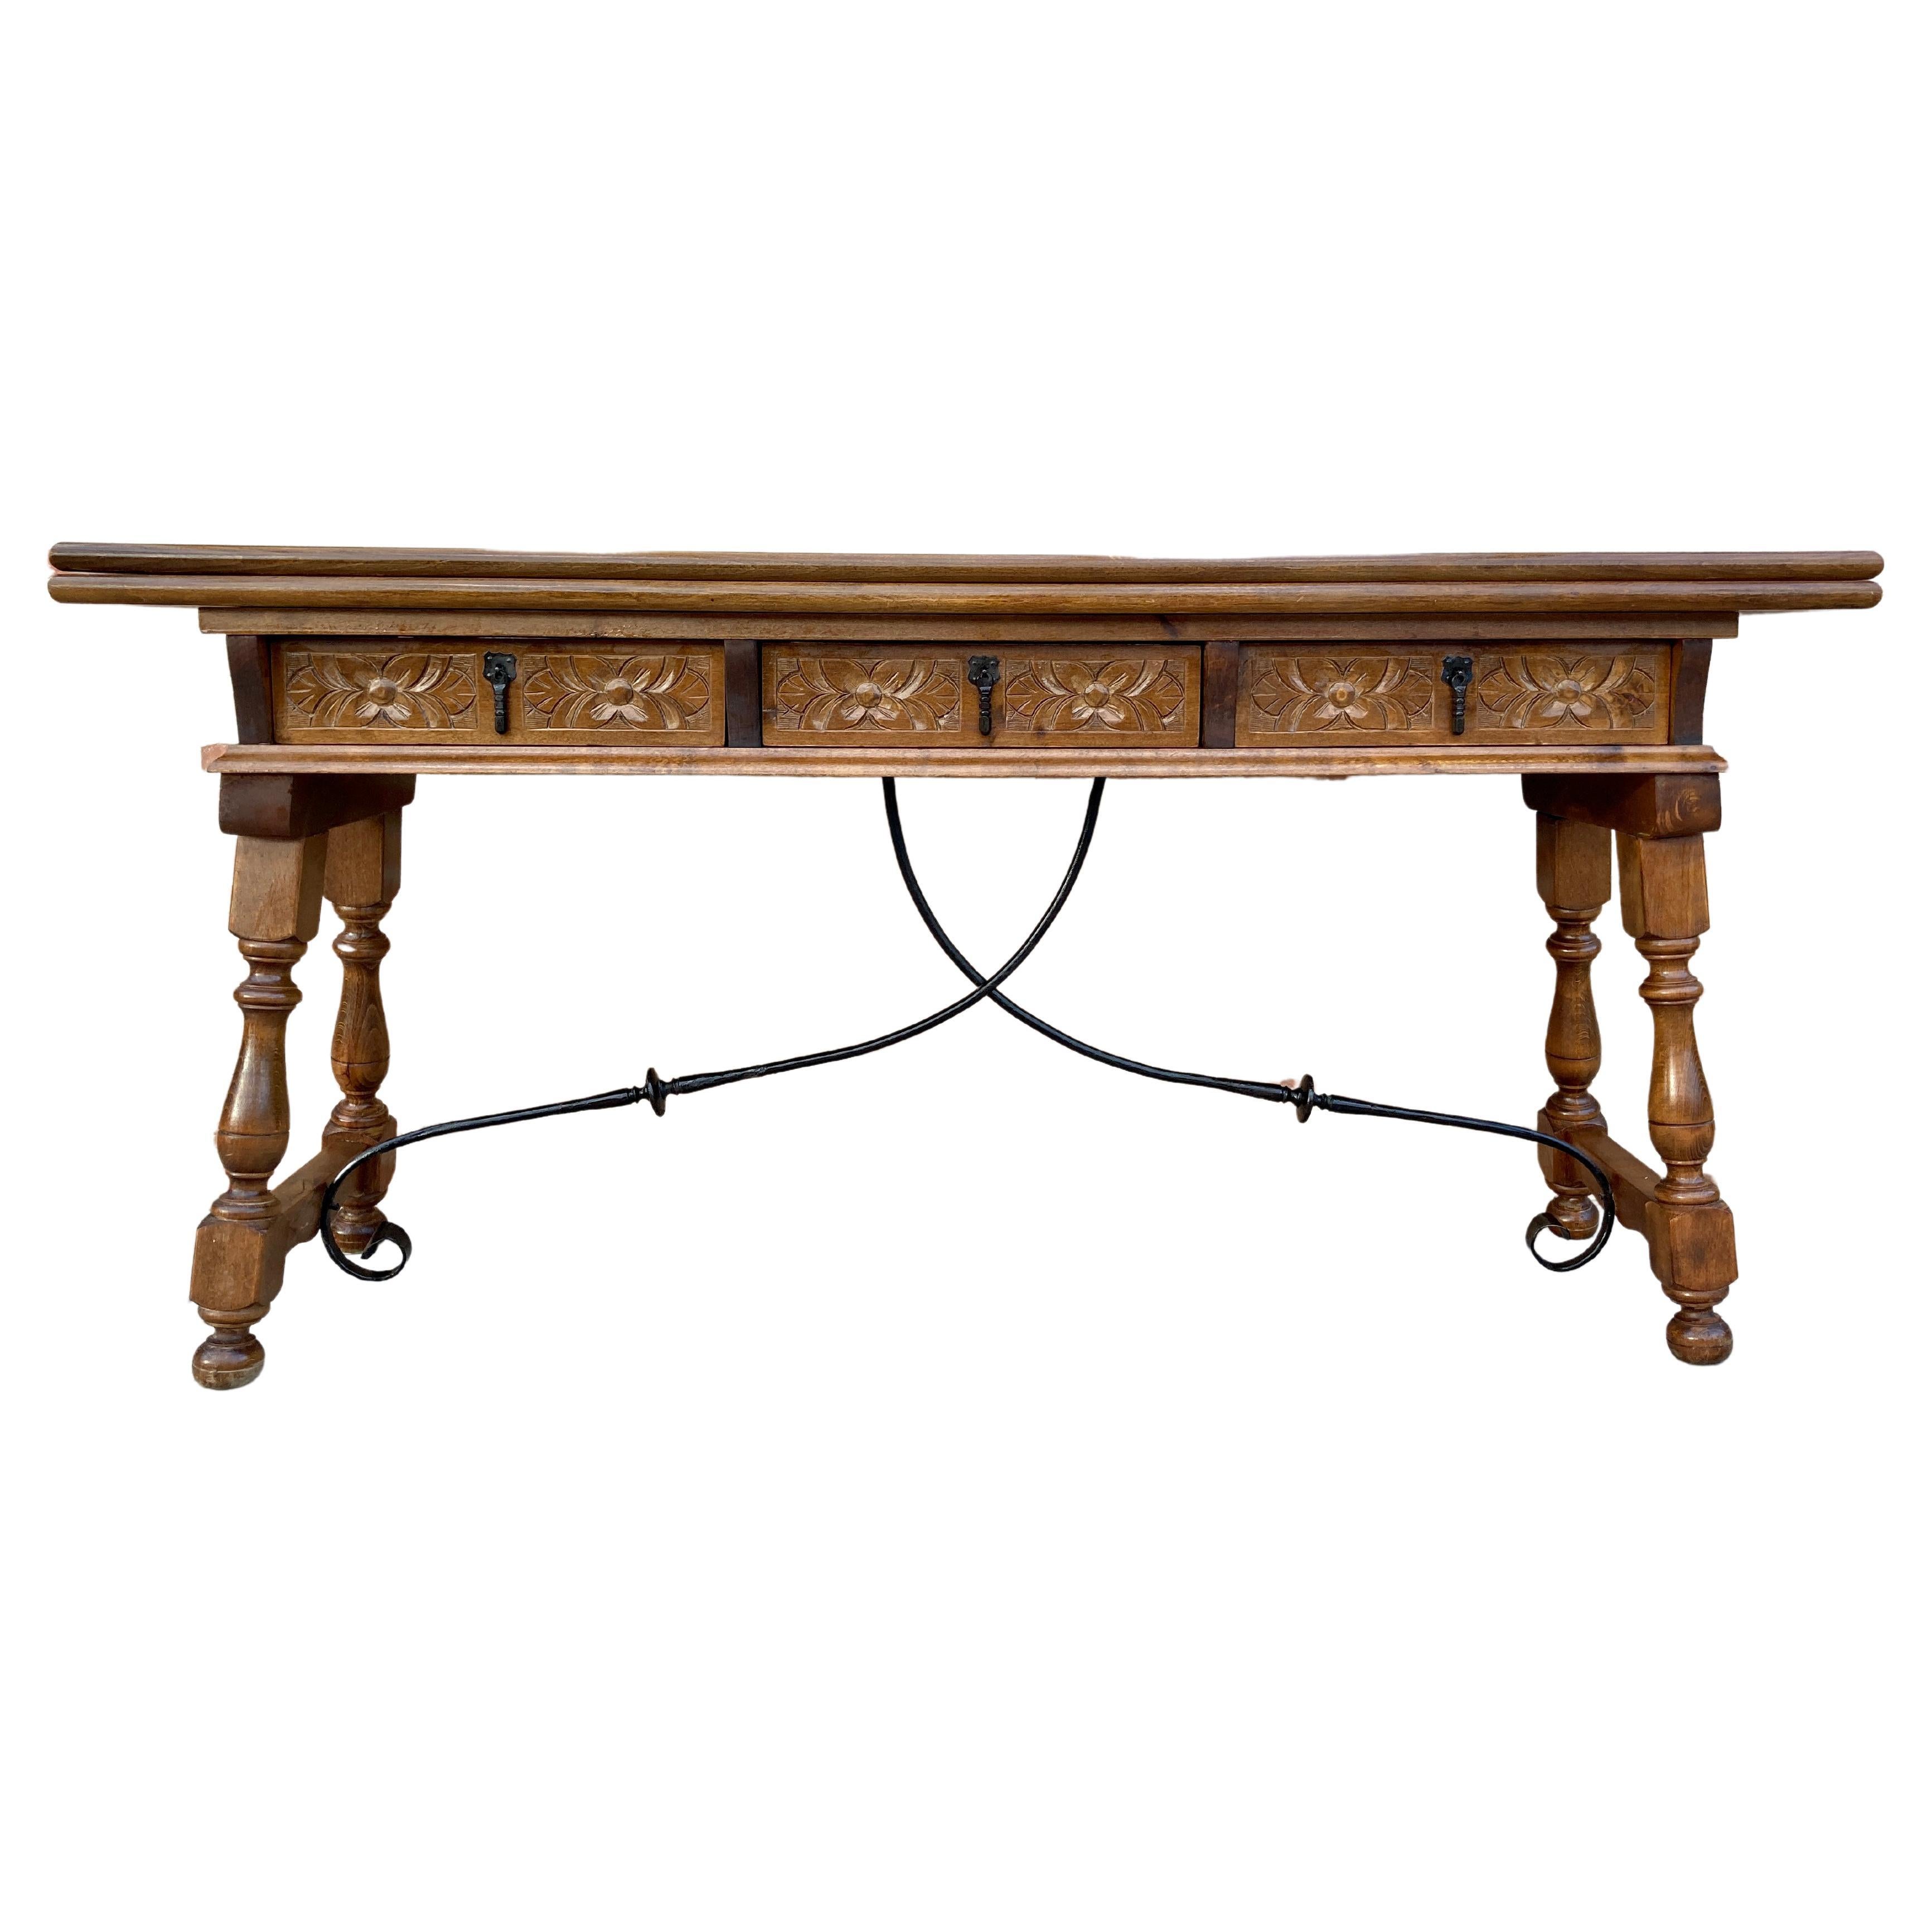 Early 20th Century Spanish Fold Out Console Table with Iron Stretcher & 3 Drawer